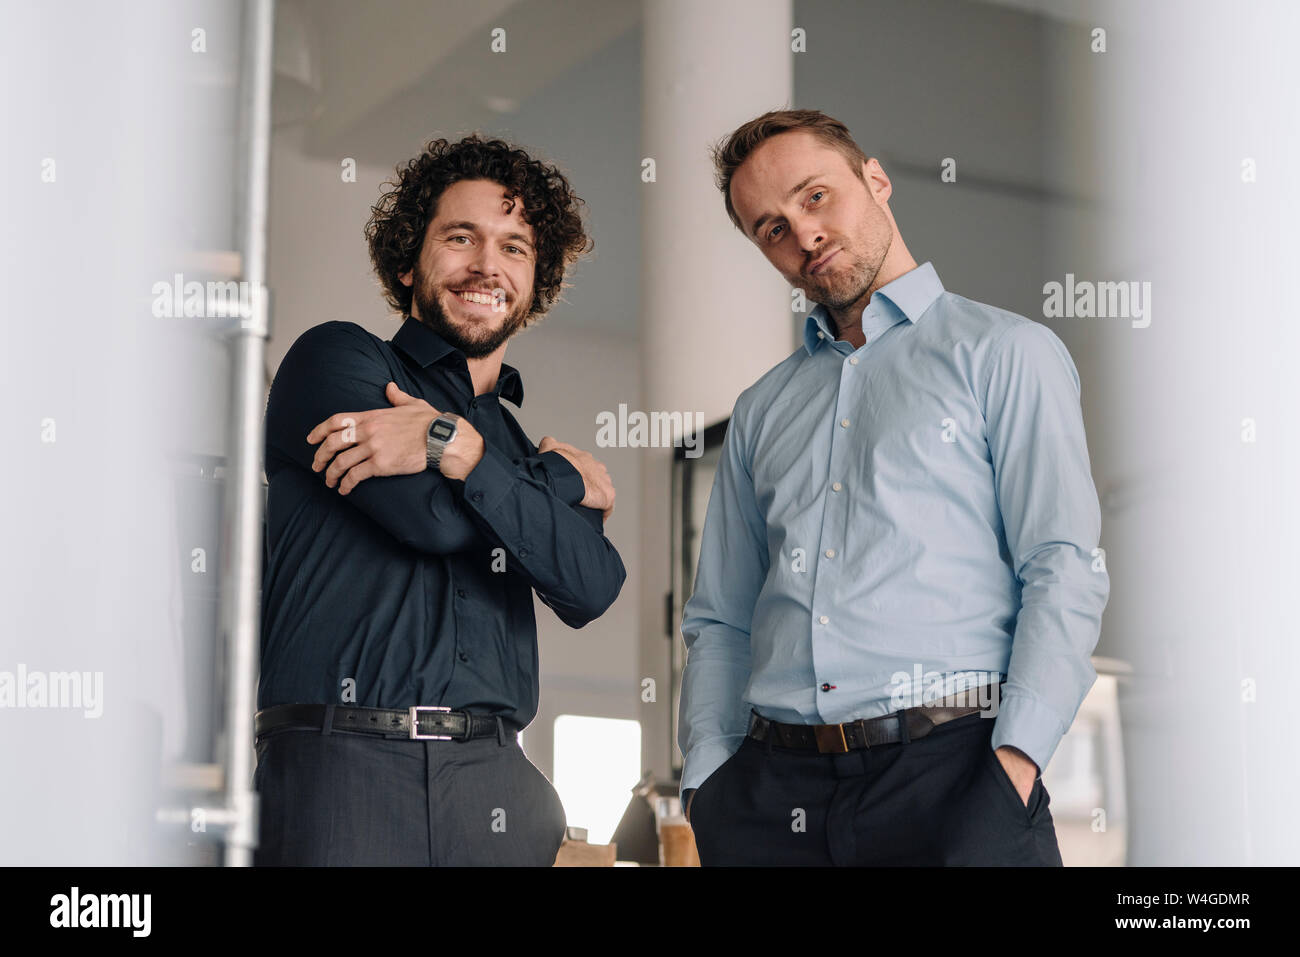 Business partners in a coffee shop waiting for customers Stock Photo